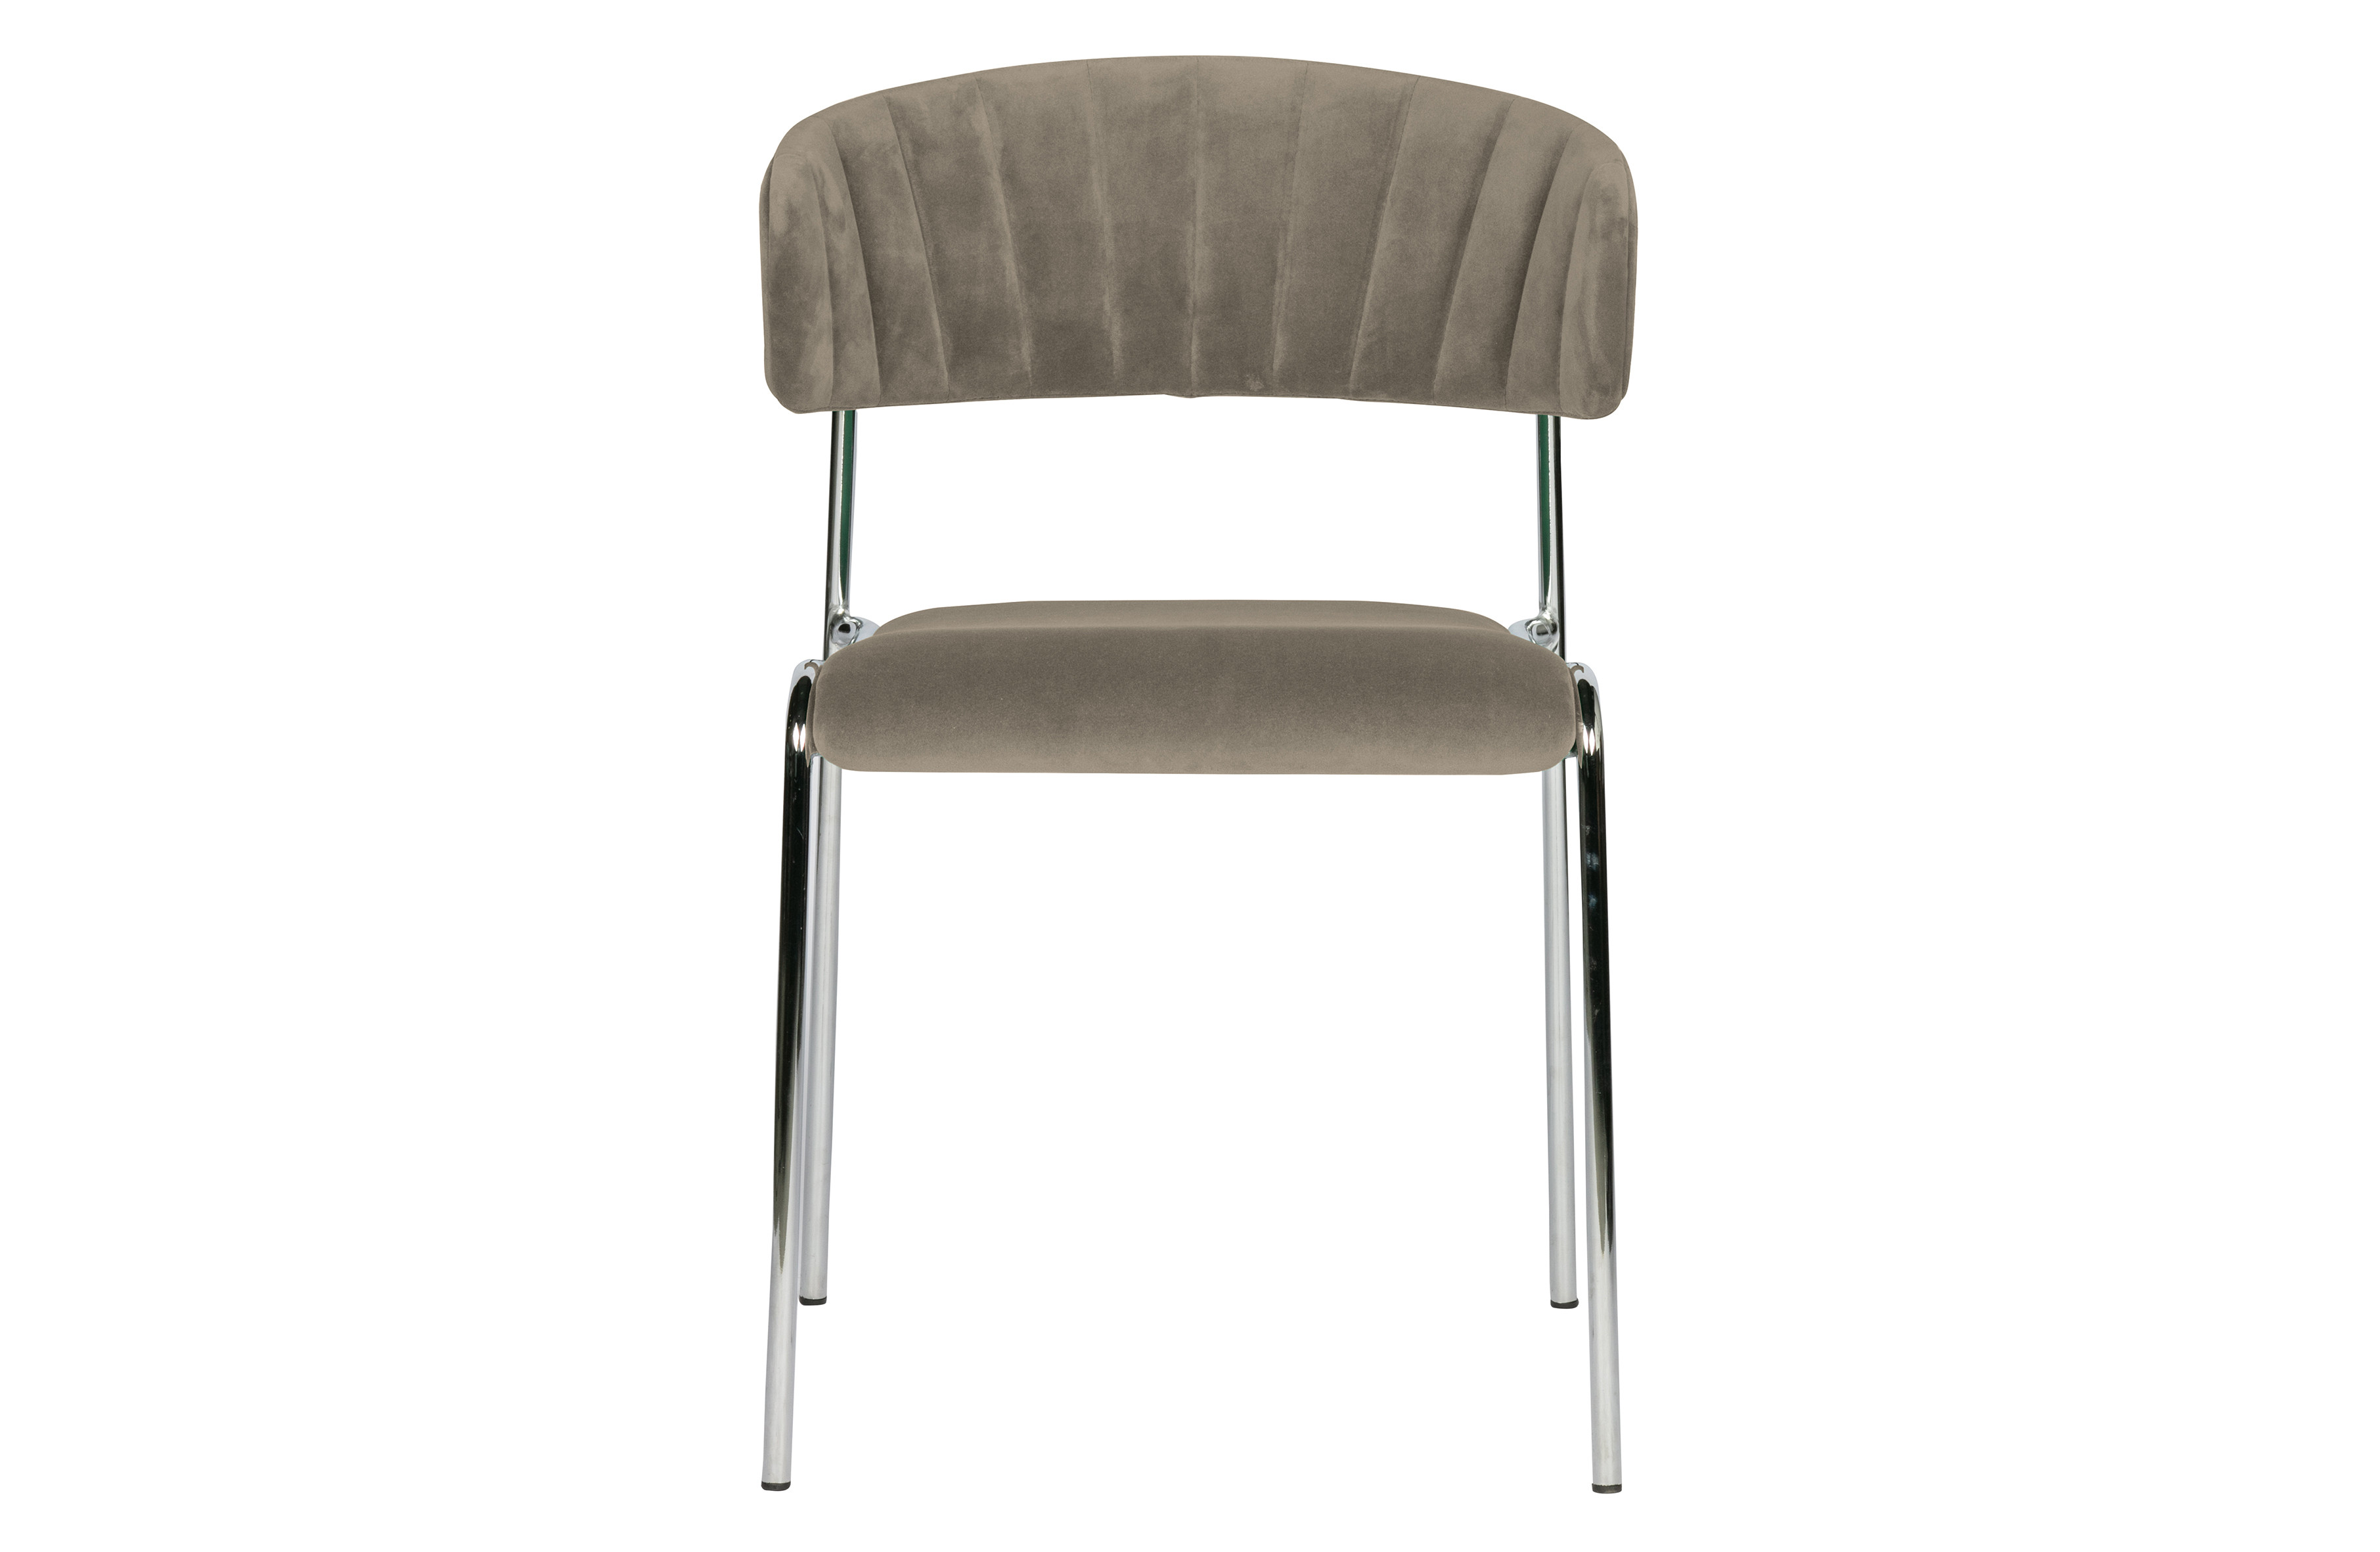 Rent a Dining chair Twitch velvet pale? Rent at KeyPro furniture rental!